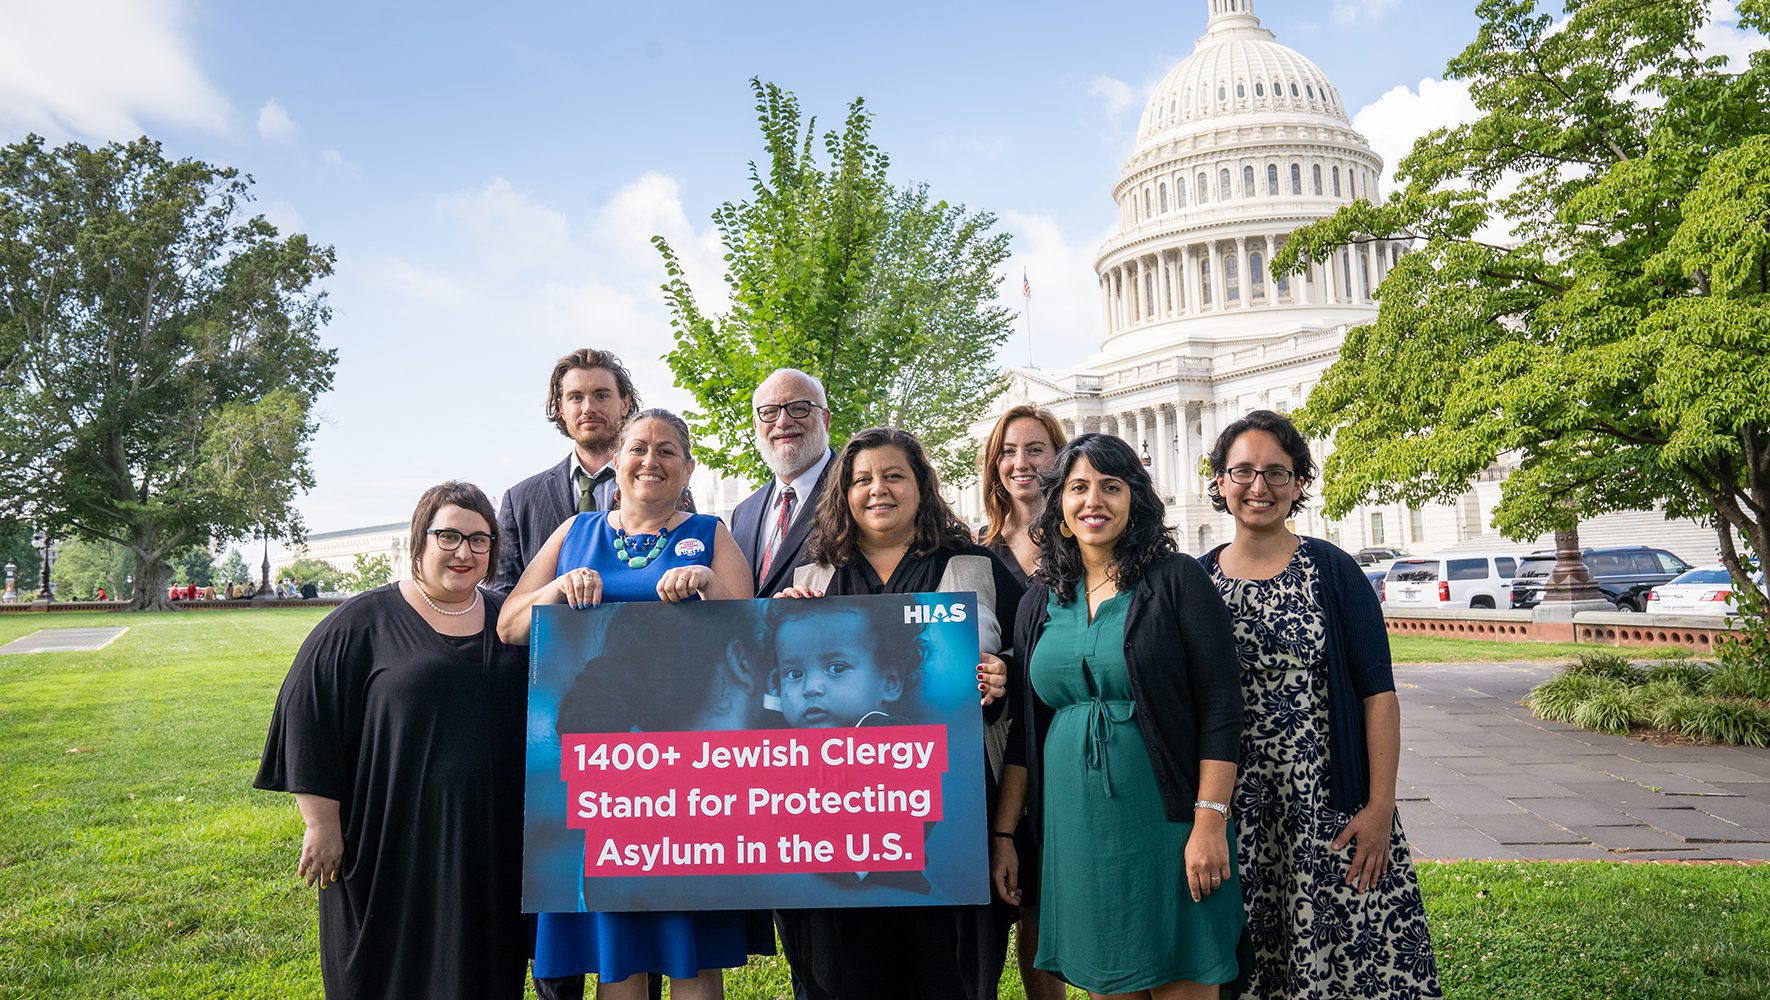 A delegation of rabbis, attorneys, and advocates gather on Capitol Hill to deliver a letter from Jewish clergy calling on elected officials to protect asylum in the U.S. | Congregational Advocacy | Join HIAS' Congregational Advocacy Network | HIAS